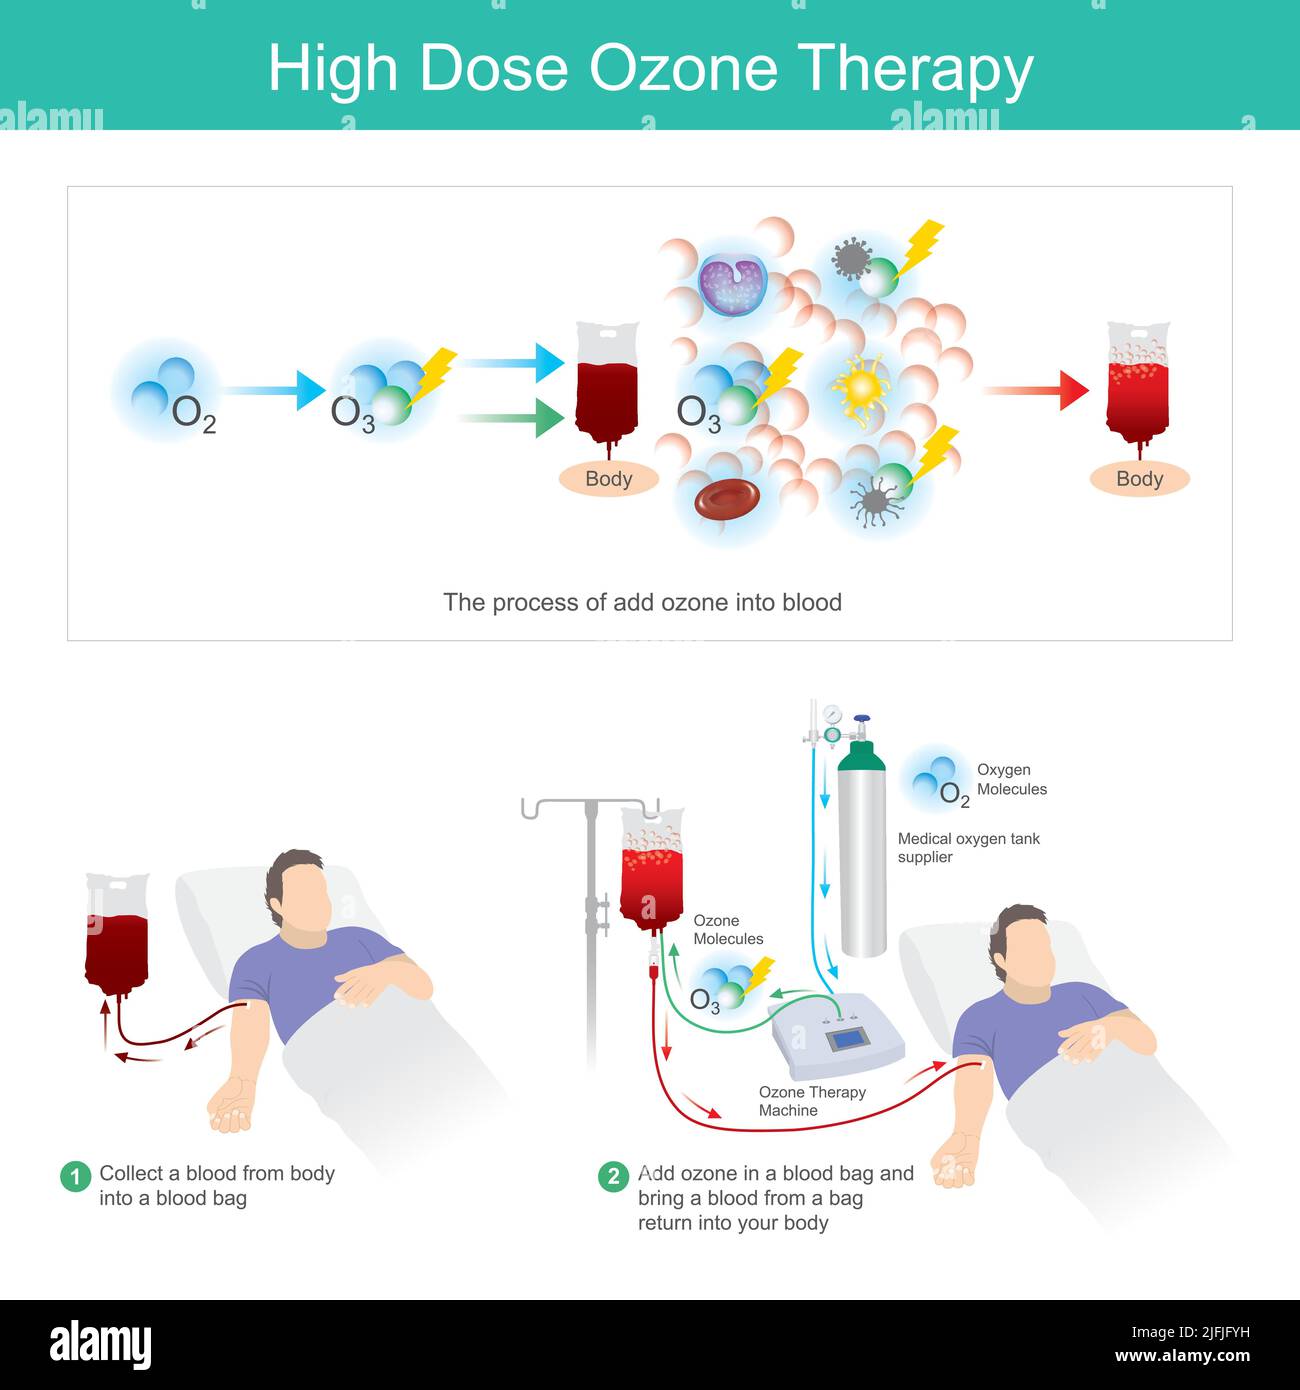 High Dose Ozone Therapy. This process add ozone in a blood bag and bring a blood from a bag return into your body. Stock Vector